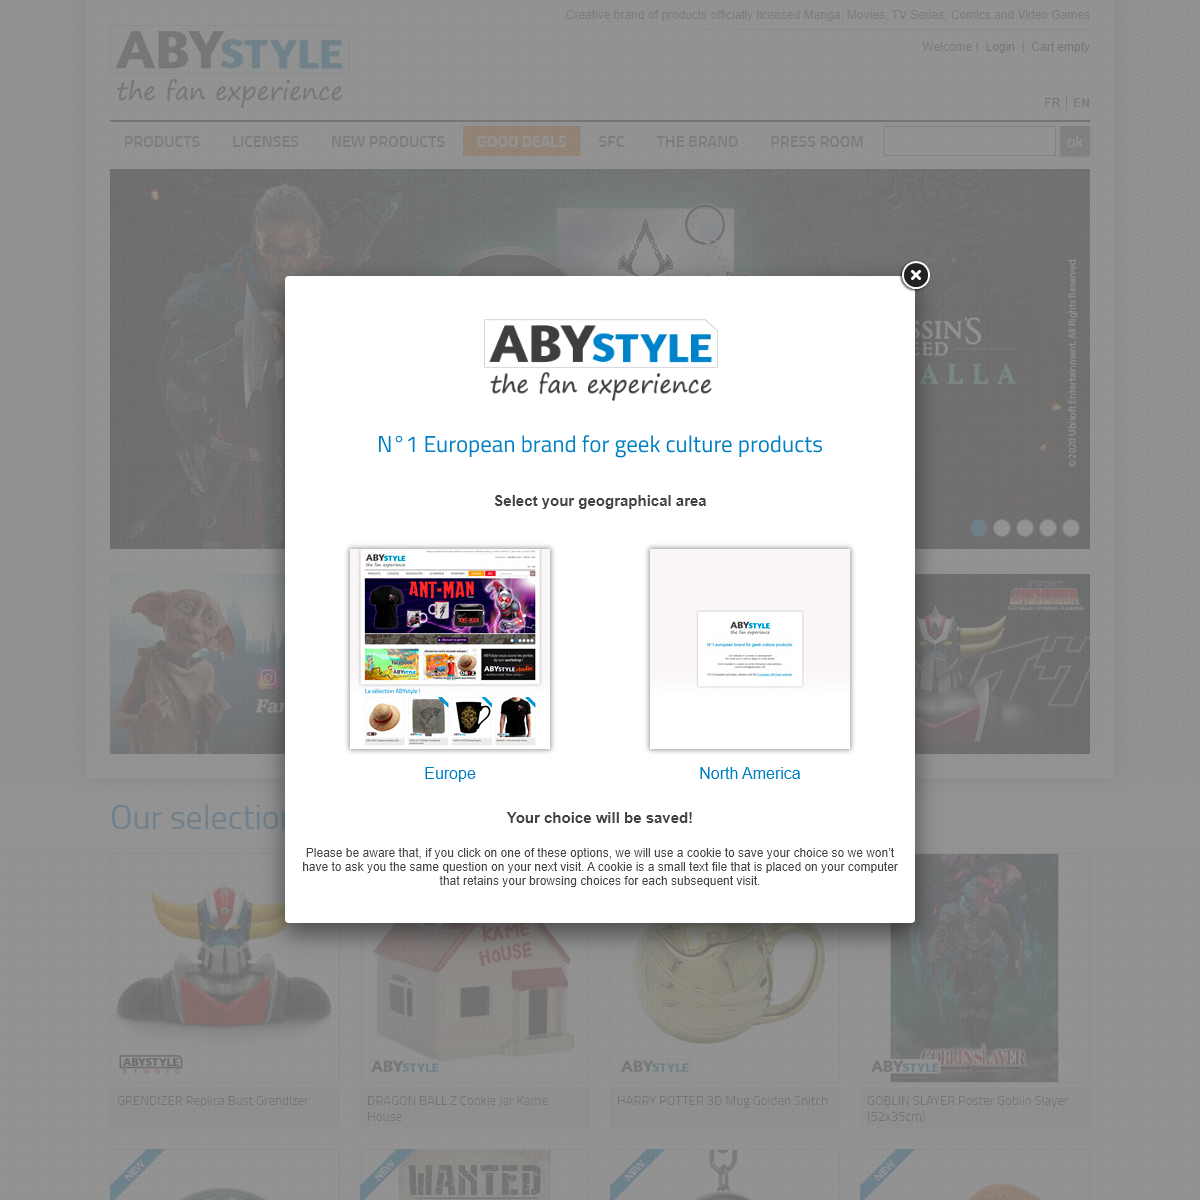 A complete backup of abystyle.com